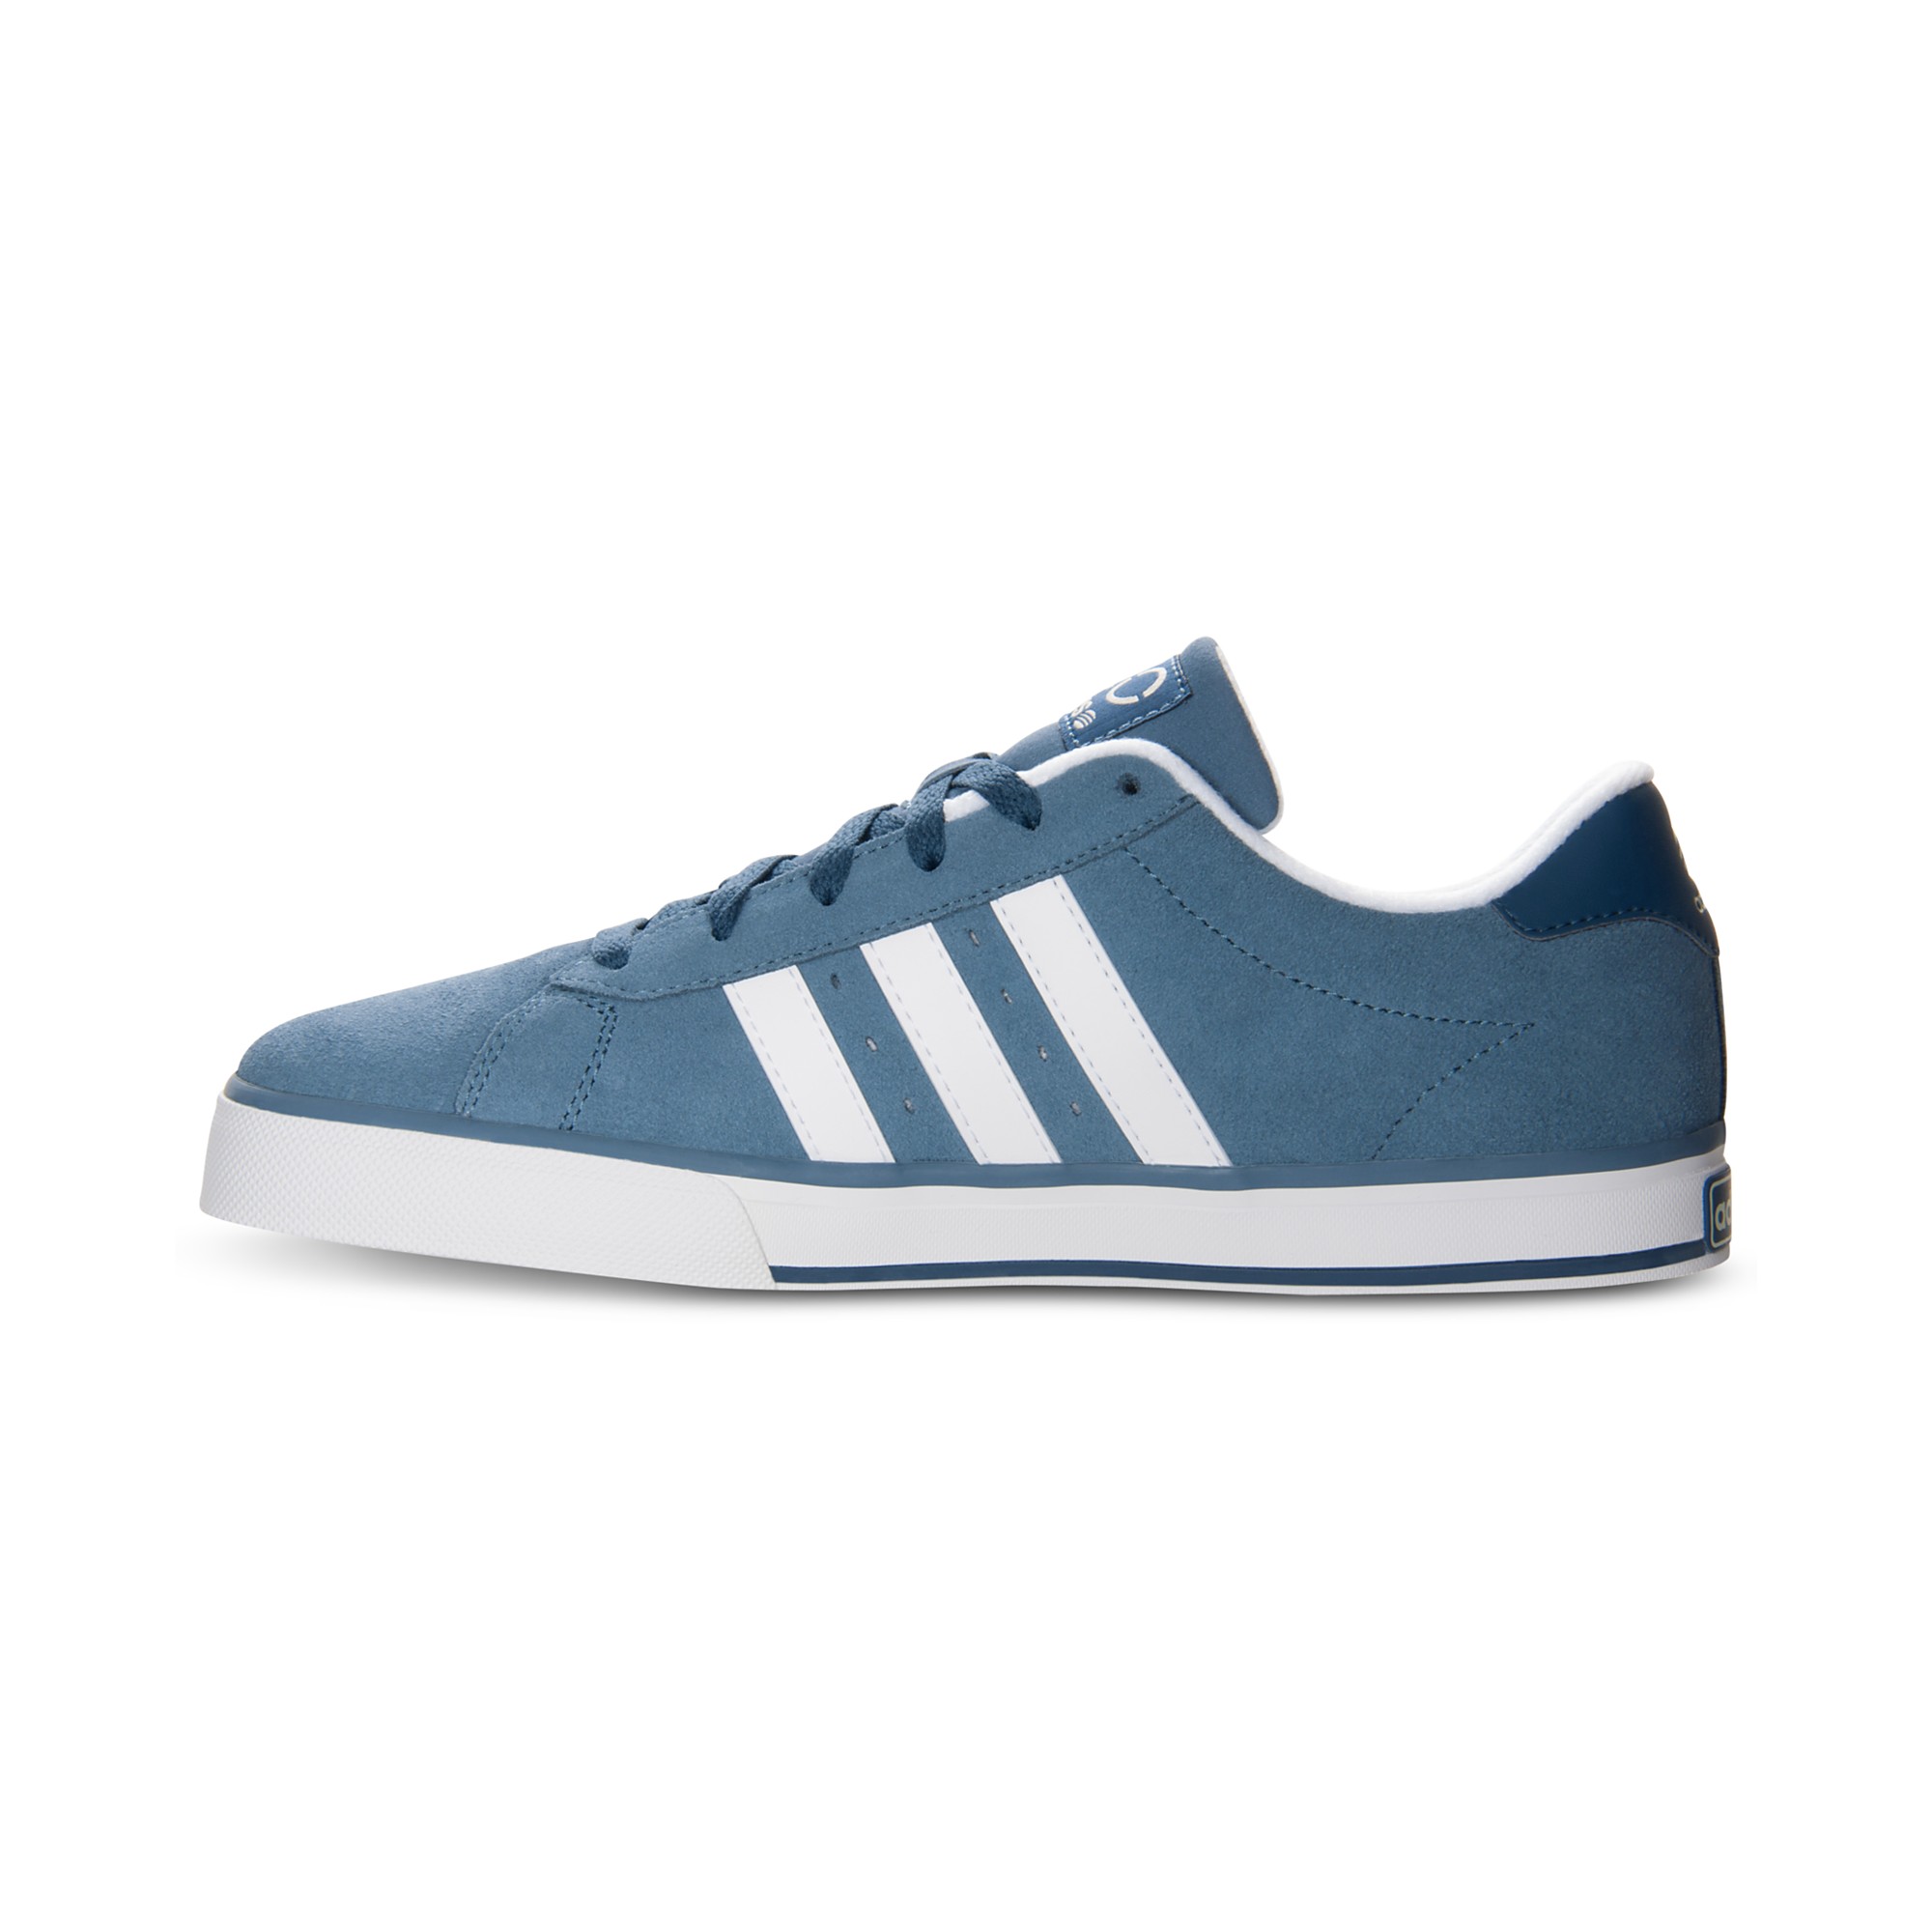 adidas Se Daily Vulc Sneakers in Blue for Men - Lyst